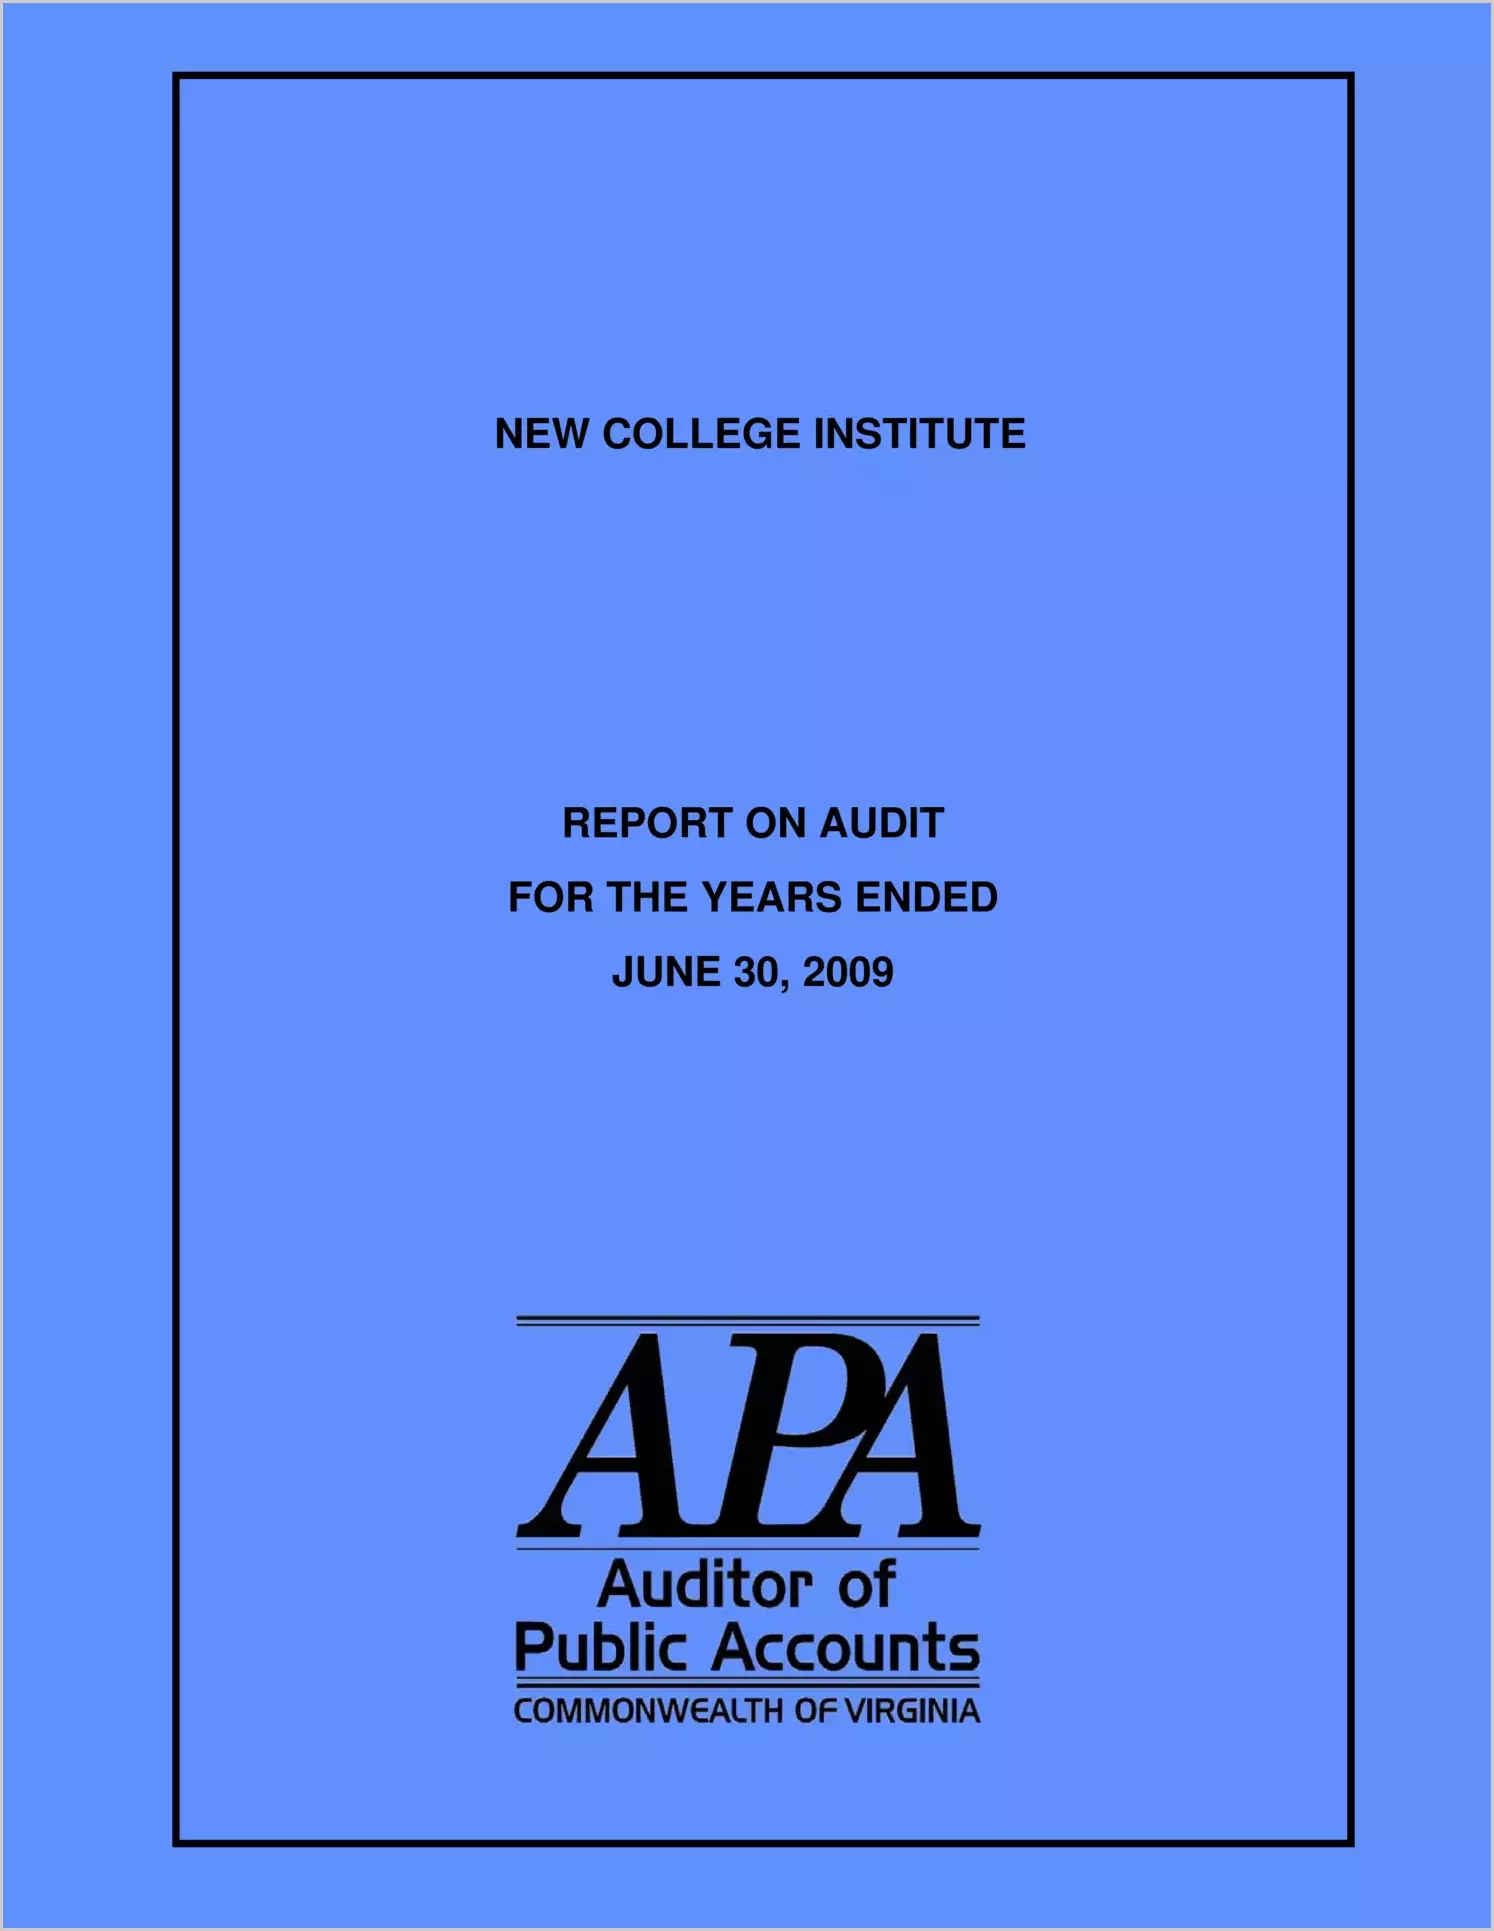 New College Institute Report on Audit for the year ended June 30, 2009